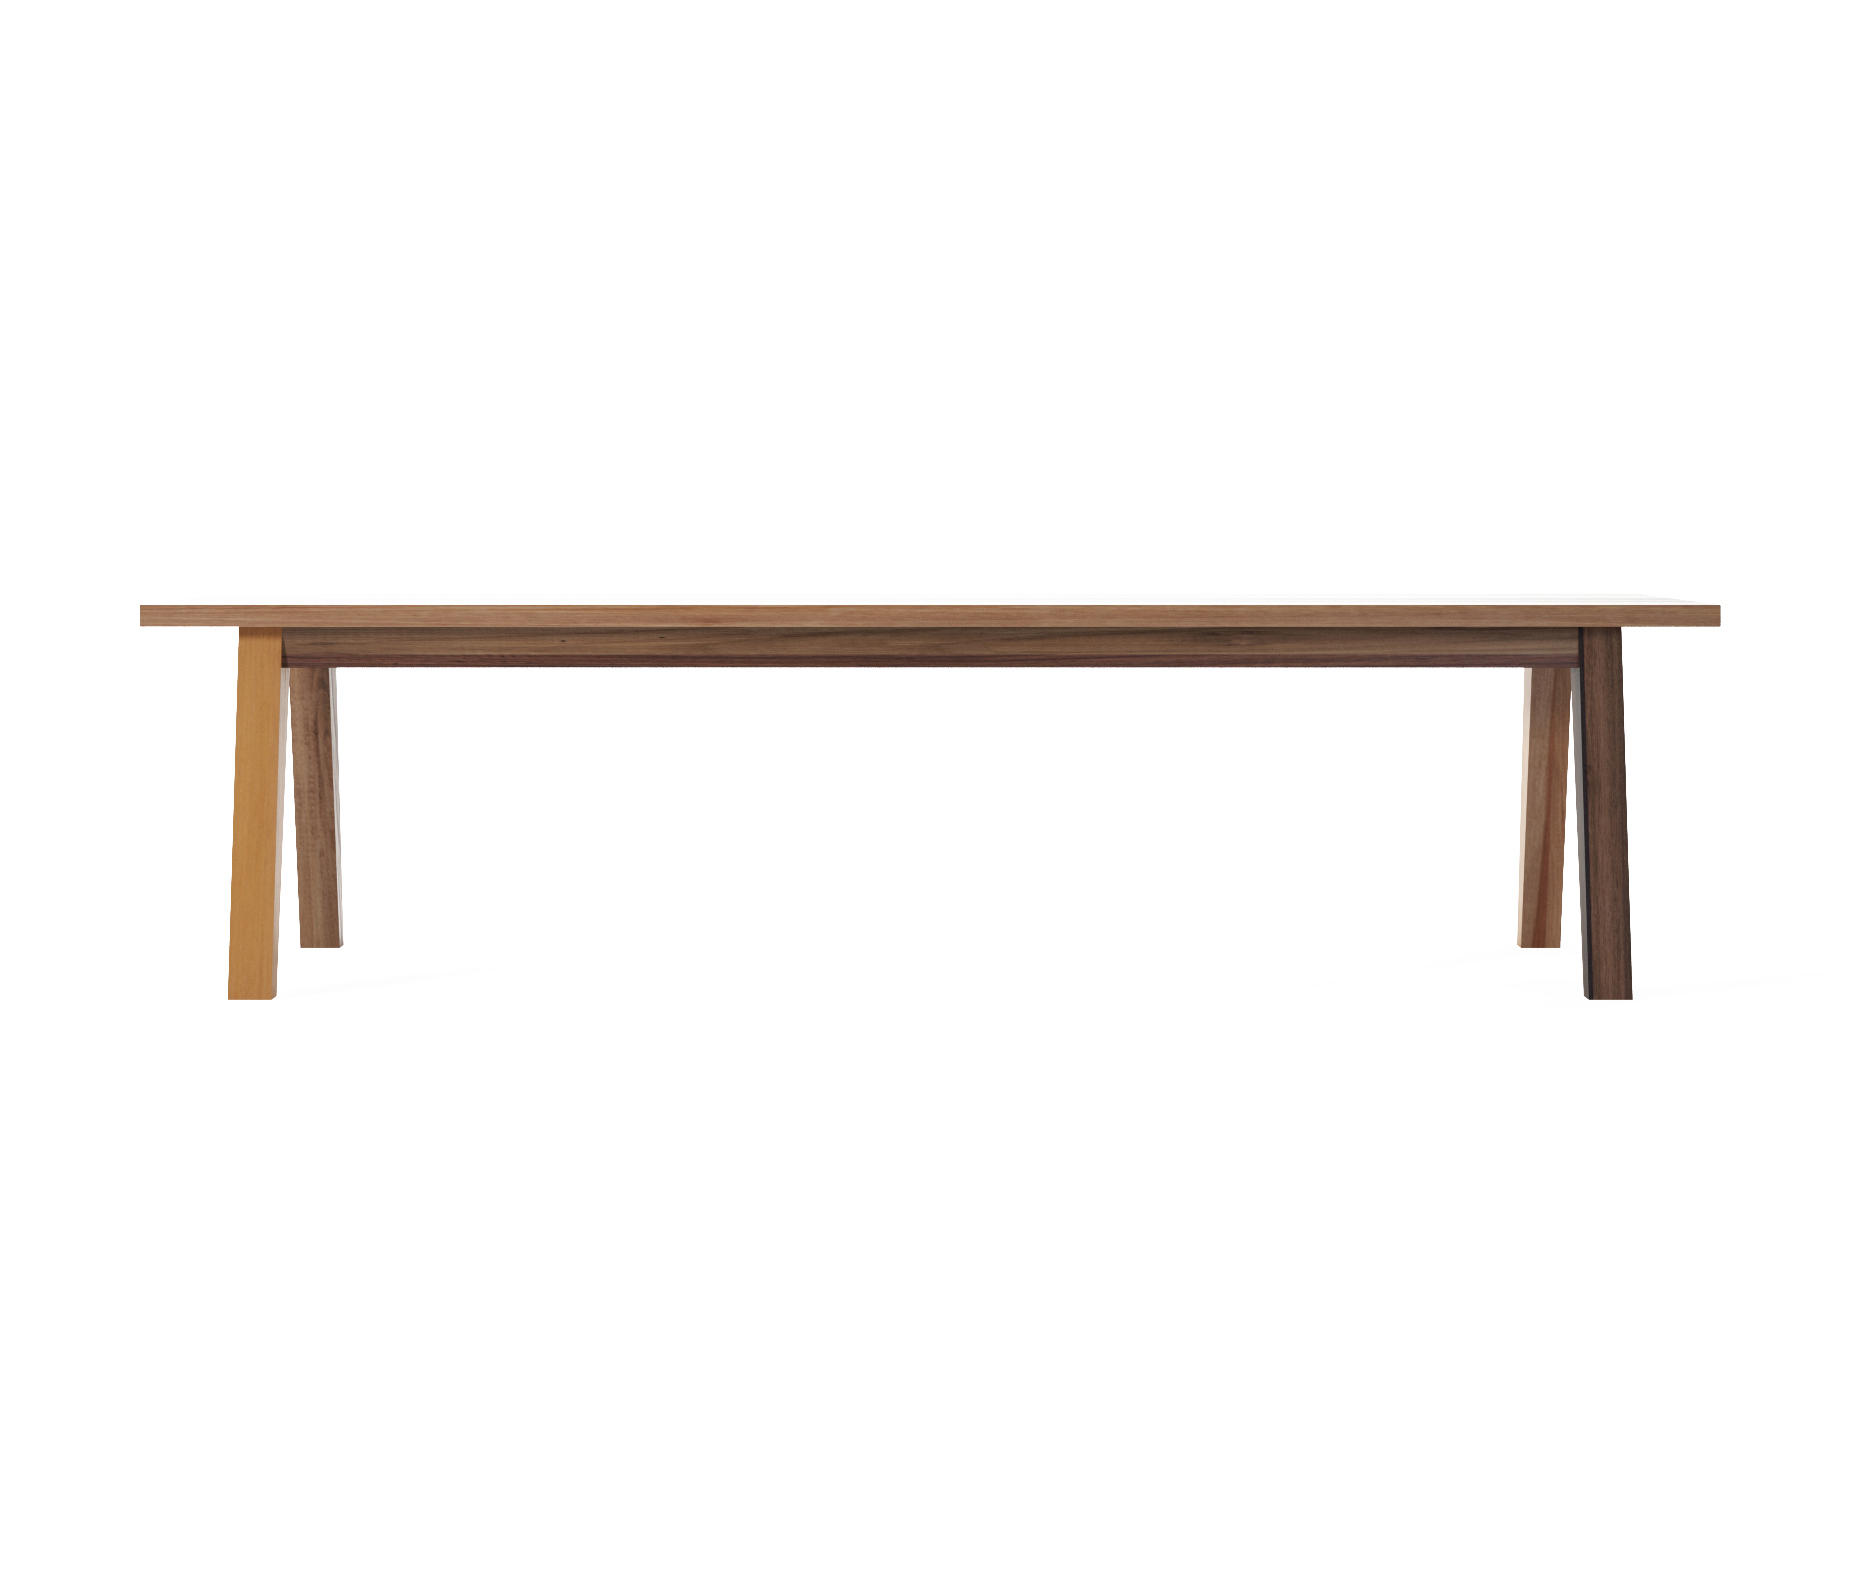 BROOKLYN BENCH - Benches from Karpenter | Architonic